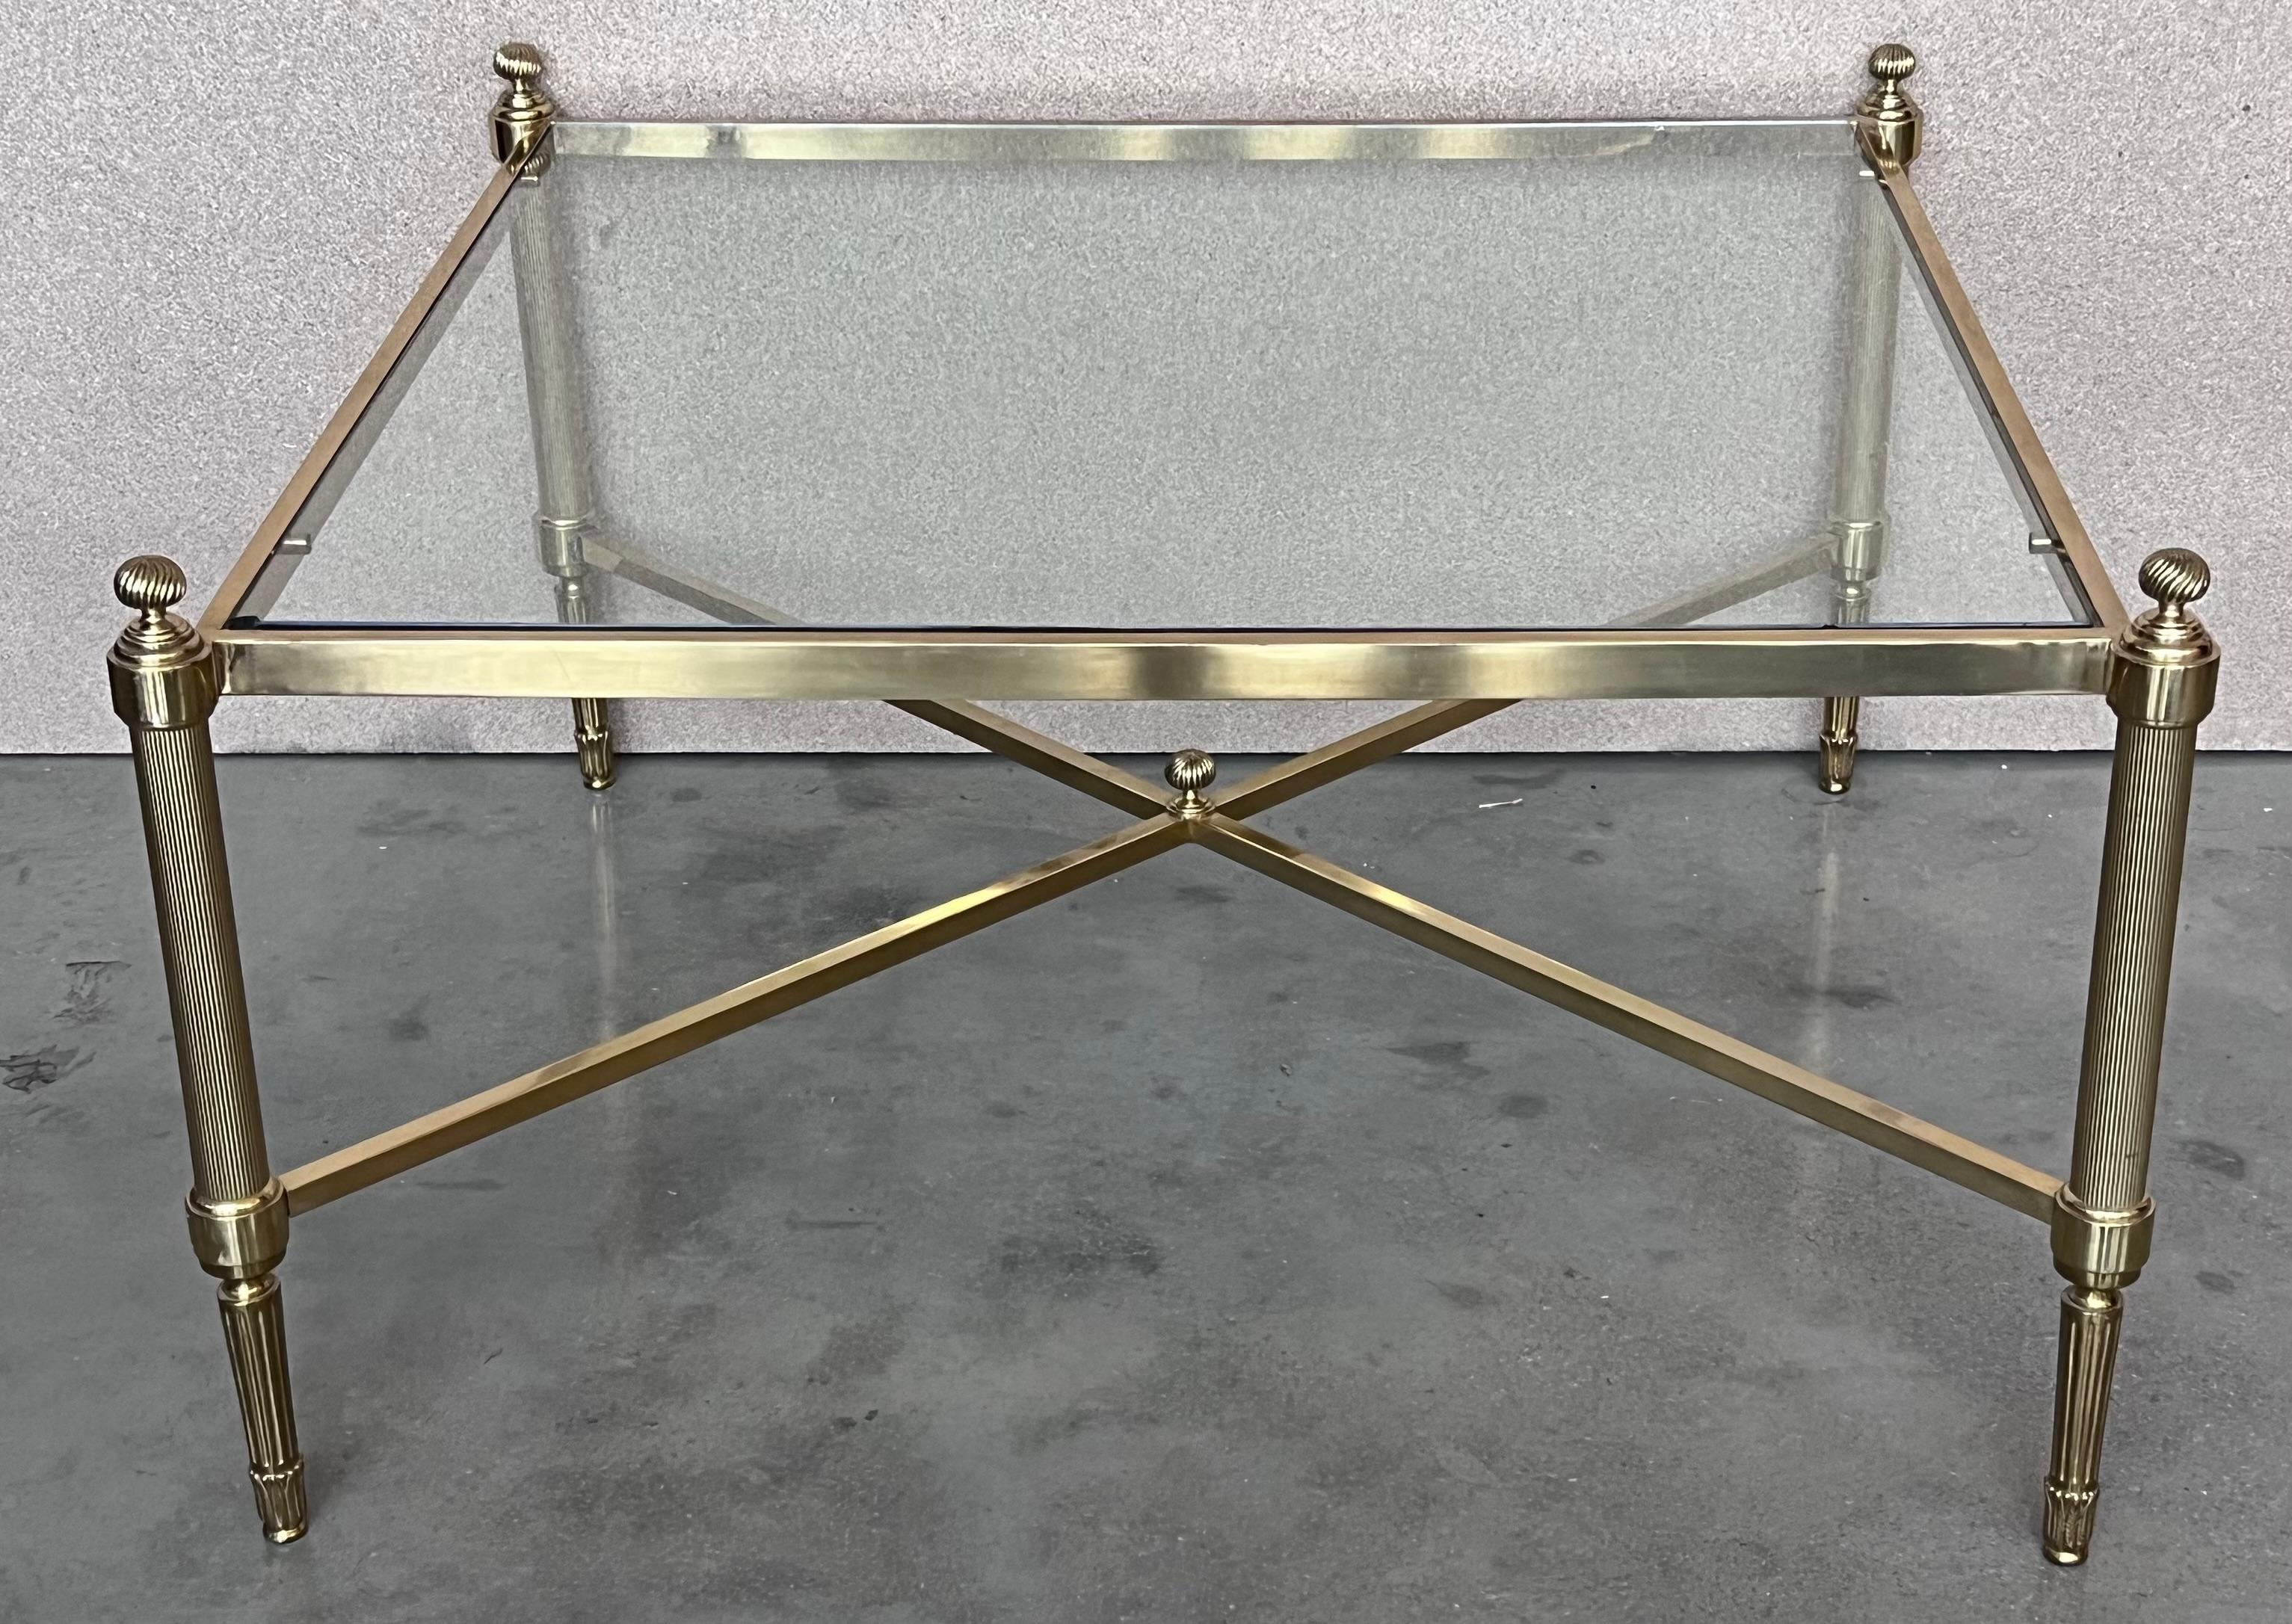 Double tray Mid-Century coffee table in Maison Jansen Style. Neoclassical style Bronze frame and crystal glass top.